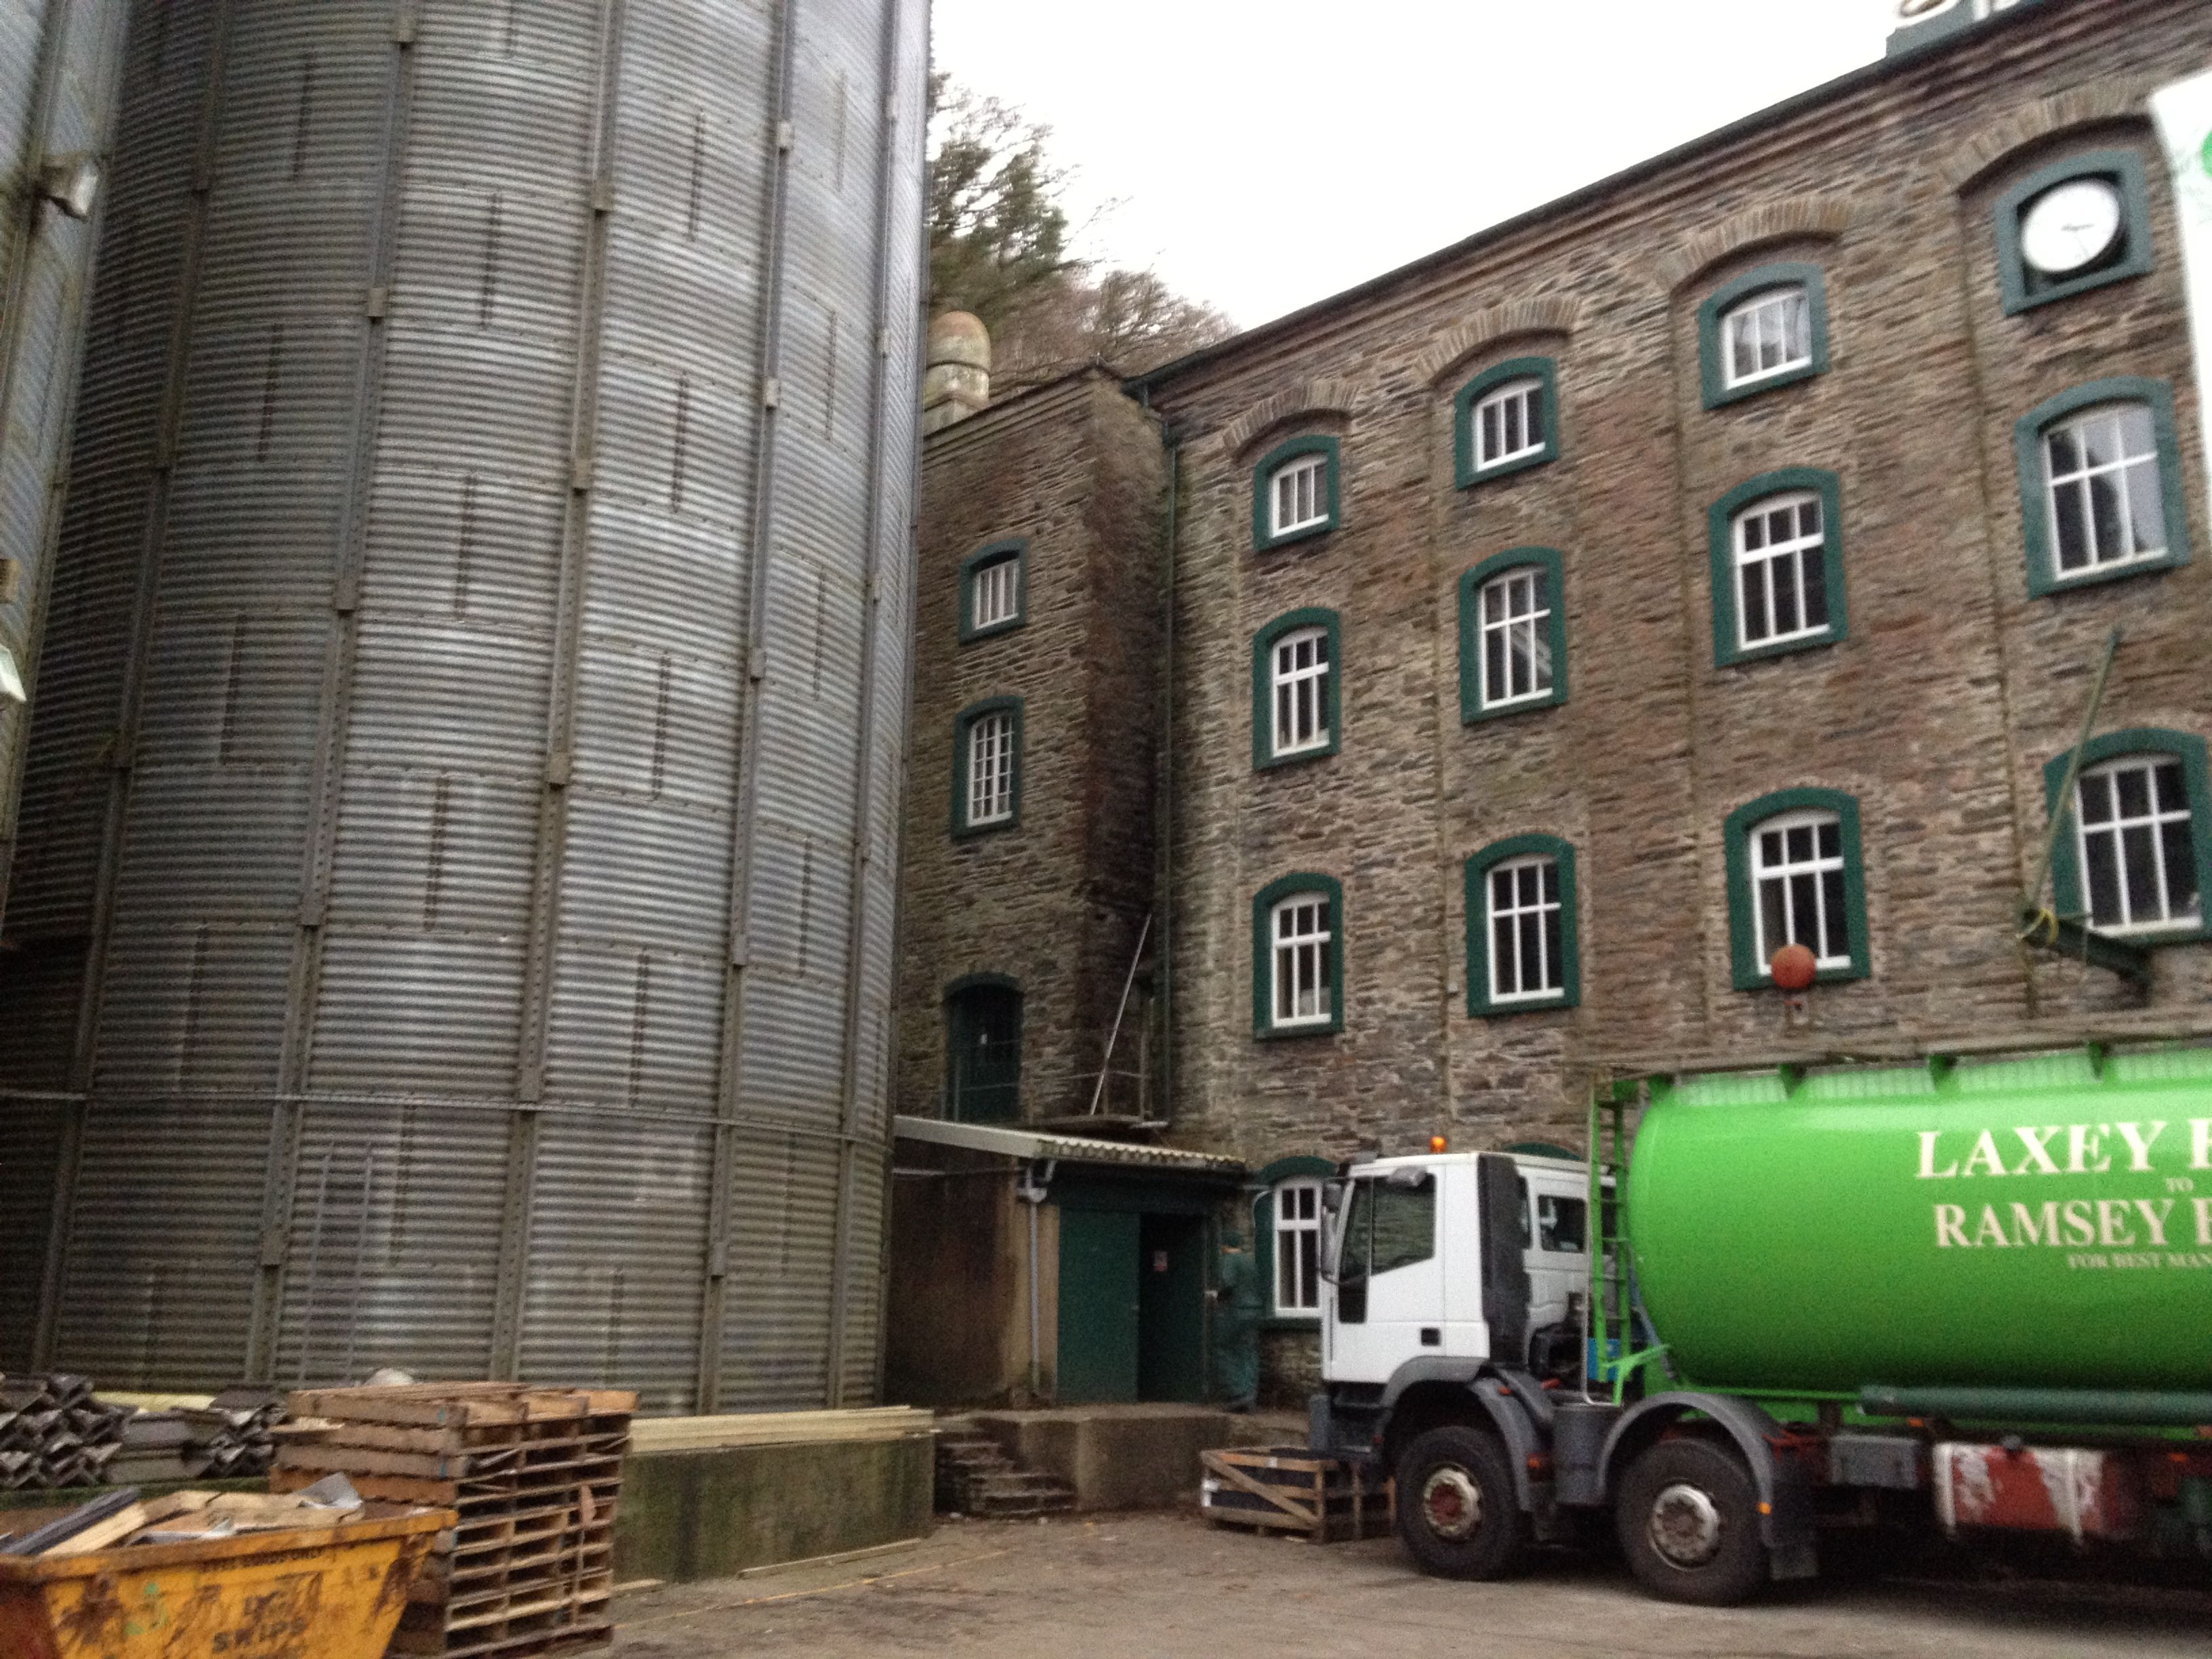 Laxey Flour Mill | Isle of Man Film